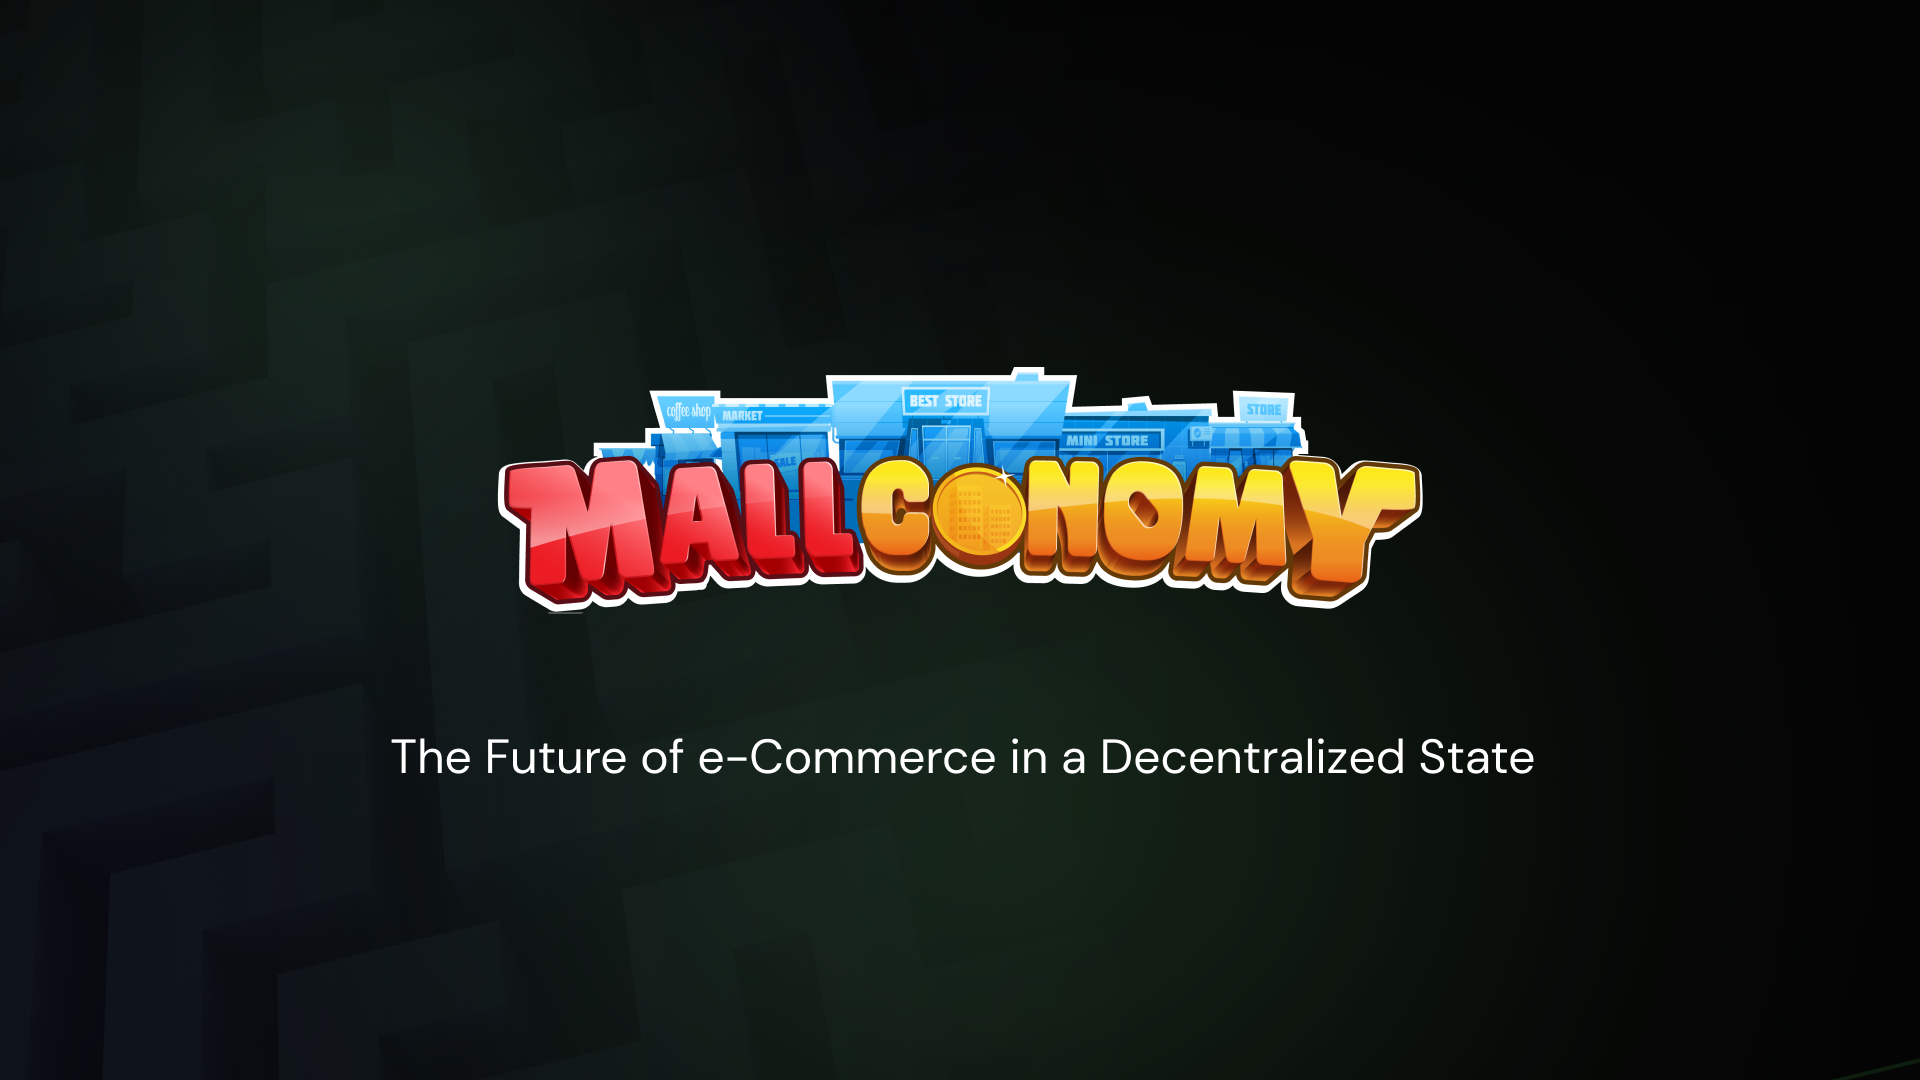 The Future of Decentralised e-Commerce